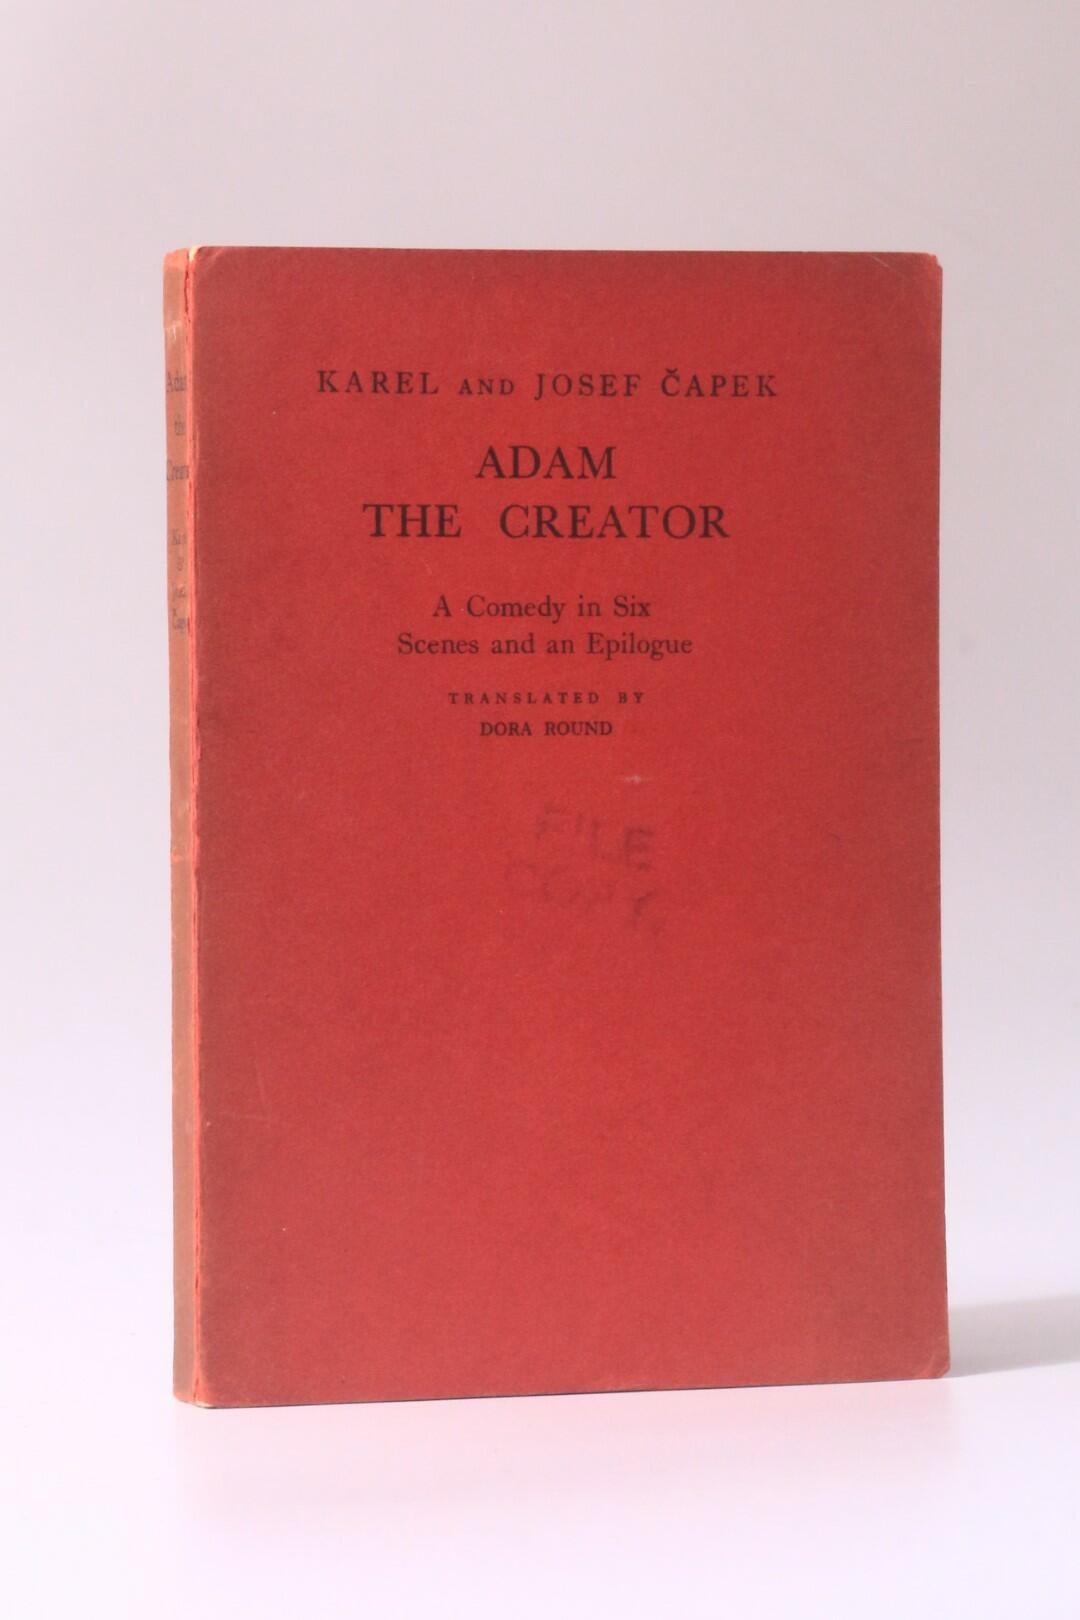 Karel and Josef Capek - Adam the Creator: A Comedy in Six Scenes and an Epilogue - George Allen & Unwin, 1929, First Edition.